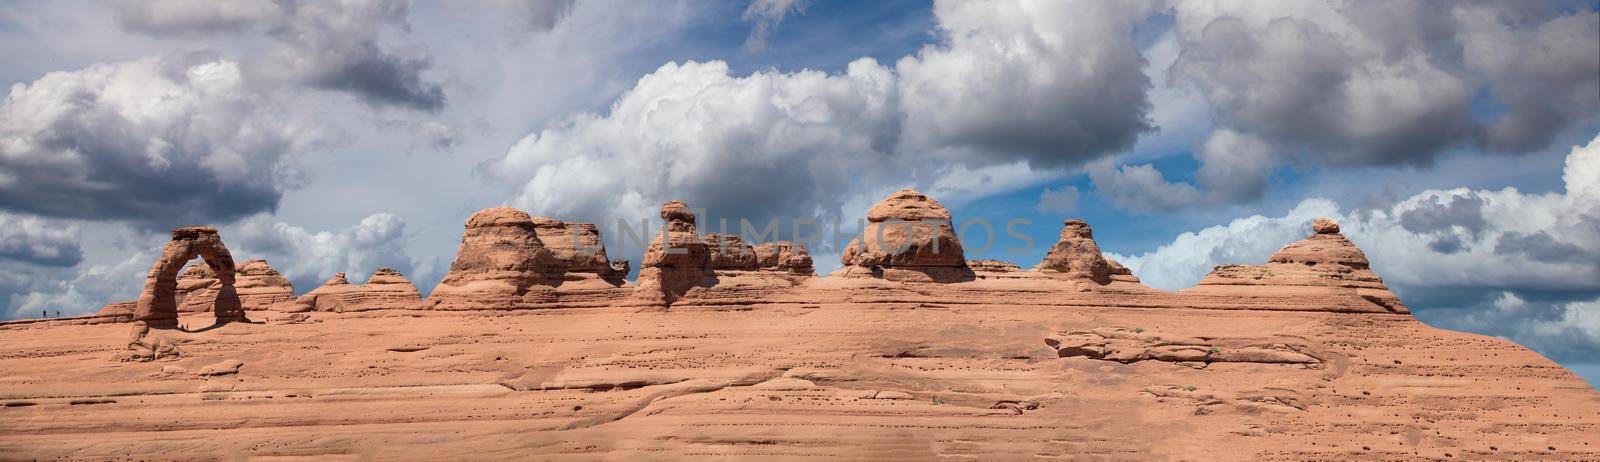 Delicate Arch panoramic view, Arches National Park. High resolution image of rock formations against blue sky by jovannig